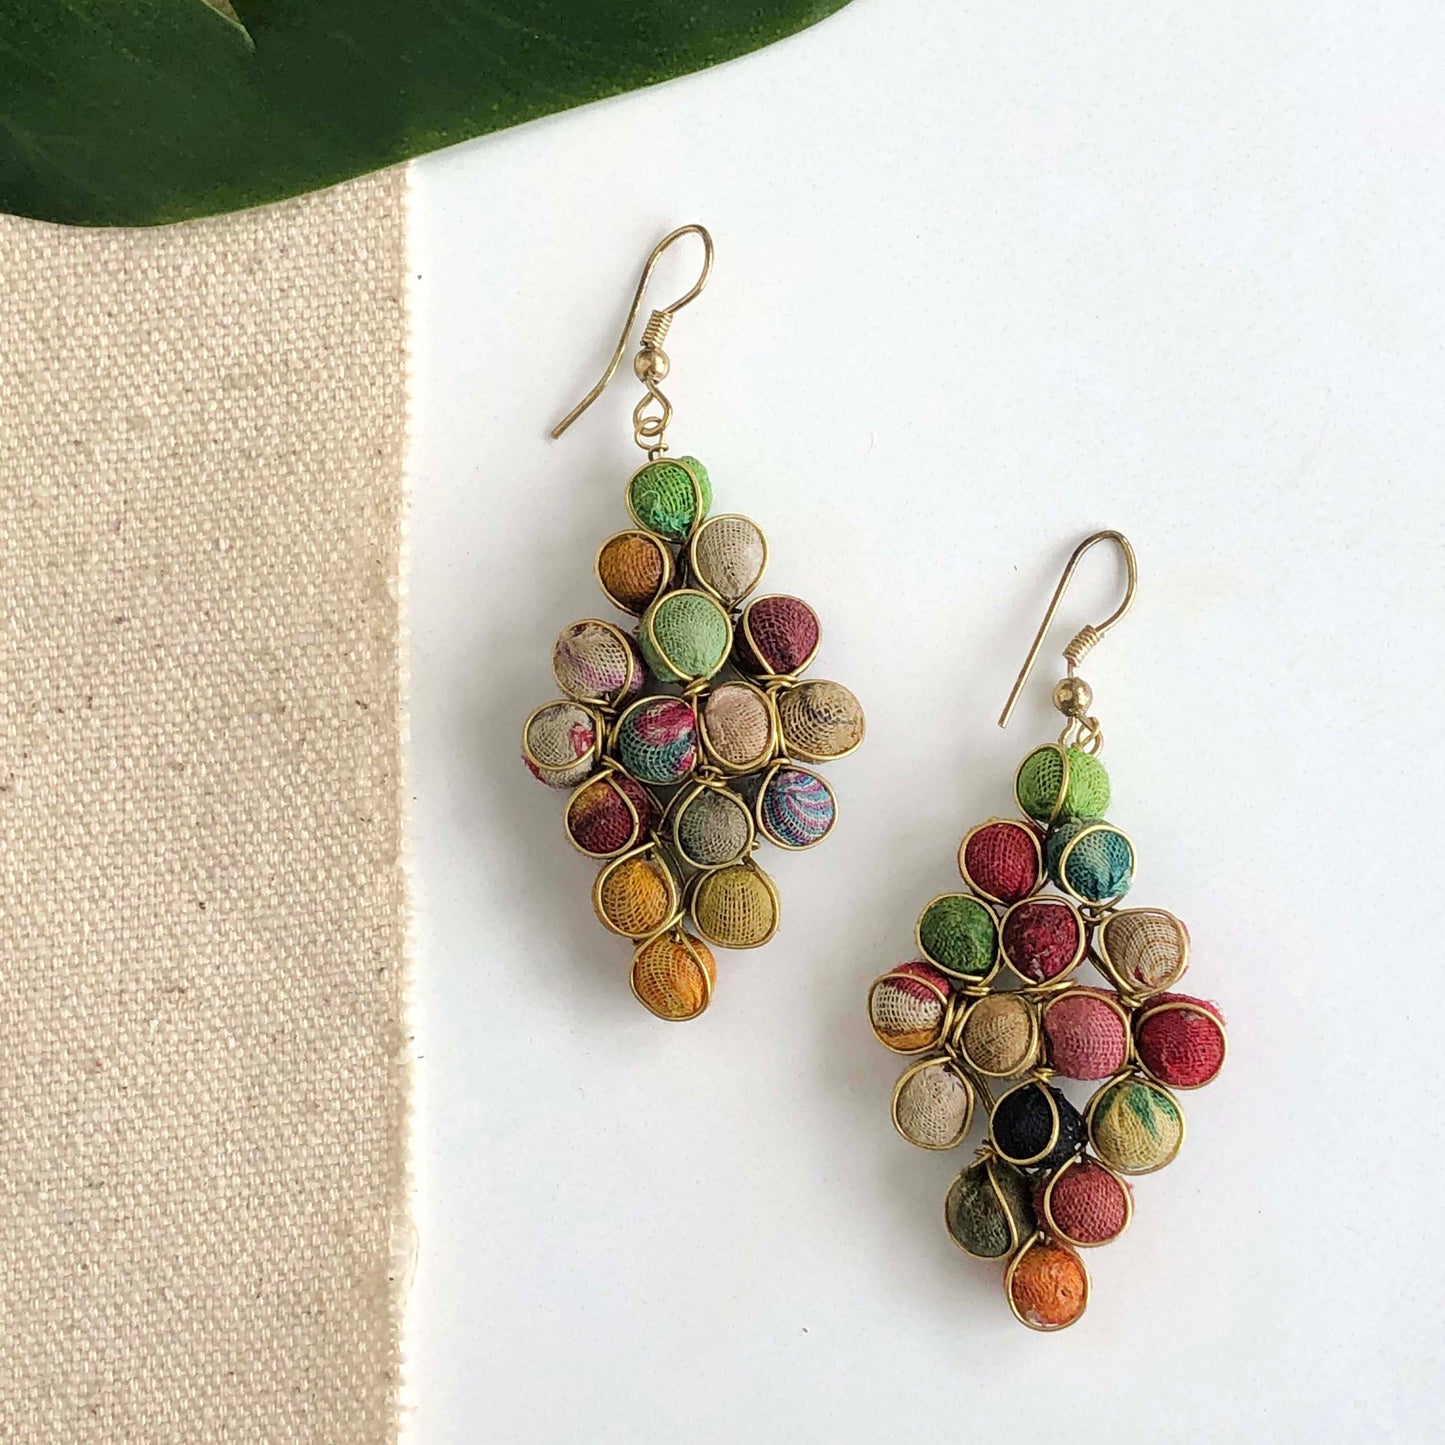 A pair of diamond-shaped earrings are formed with colorful textile-wrapped beads and gold wire.